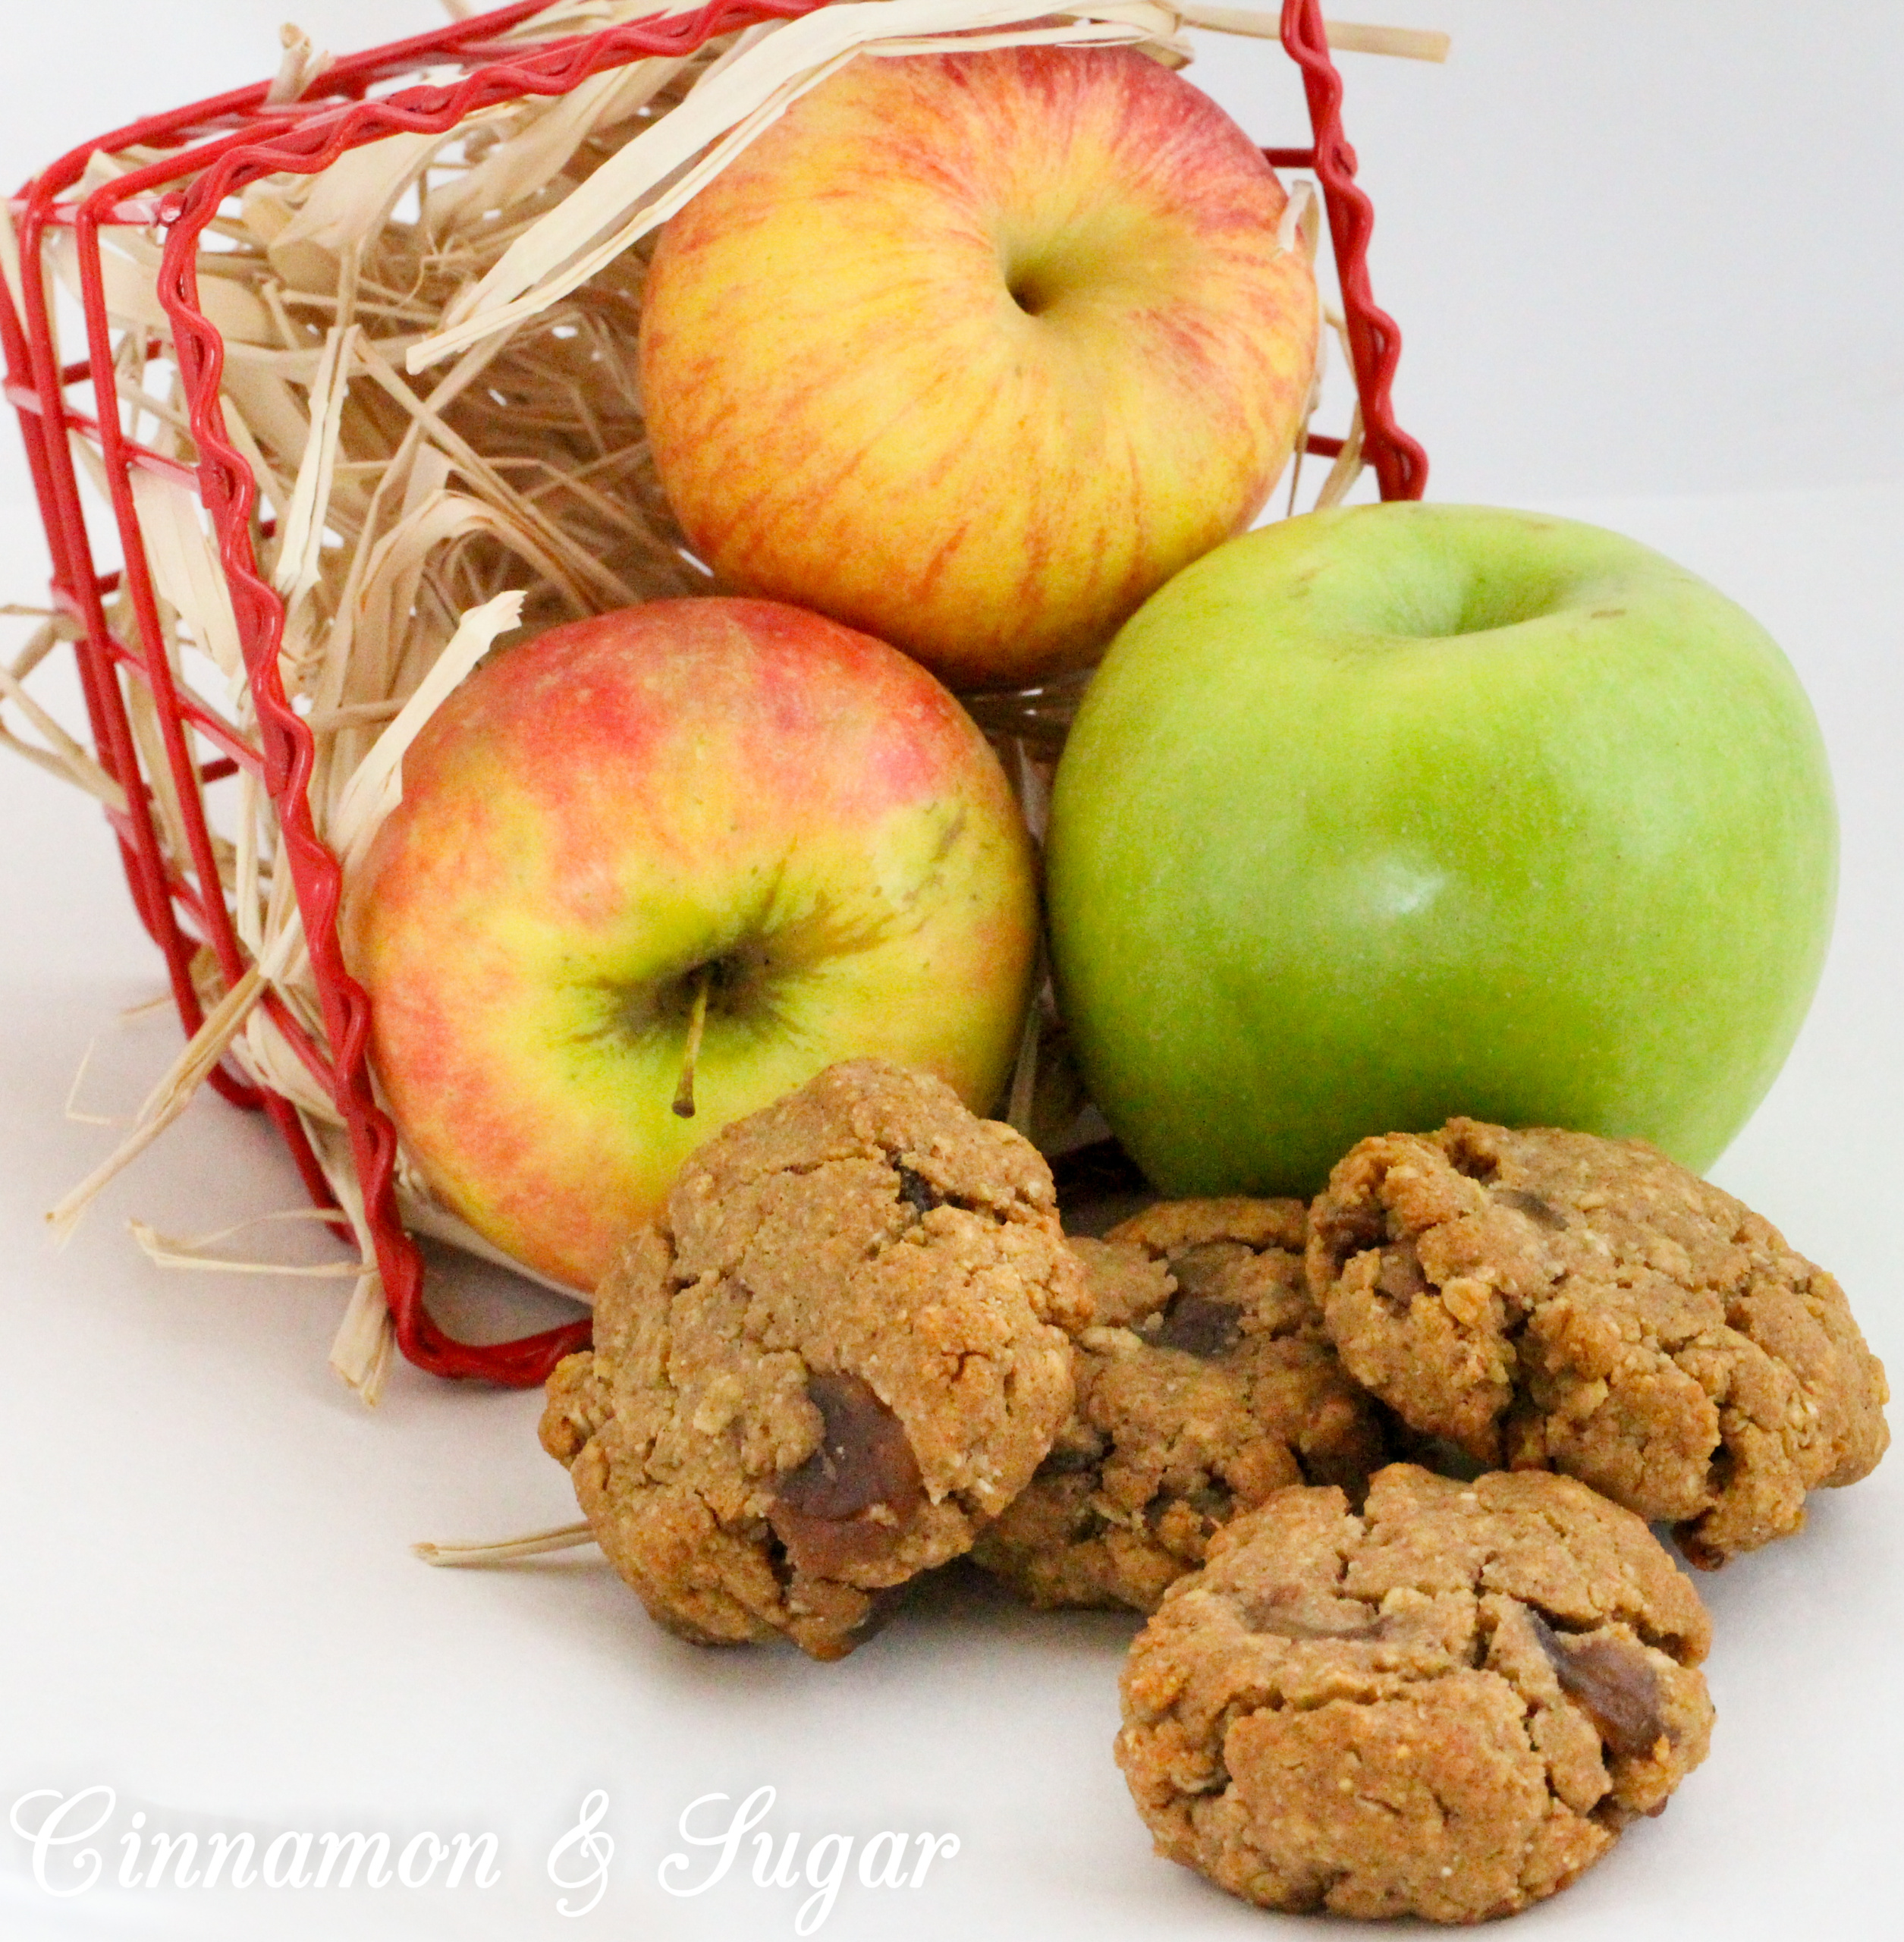 Appie Oaters combine buttery, caramelized apples mixed into an oat cookie dough creating a treat that is reminiscent of apple pie. Perfect for snacks and even breakfast! Recipe shared with permission granted by Chelsea Thomas, author of APPLE DIE. 